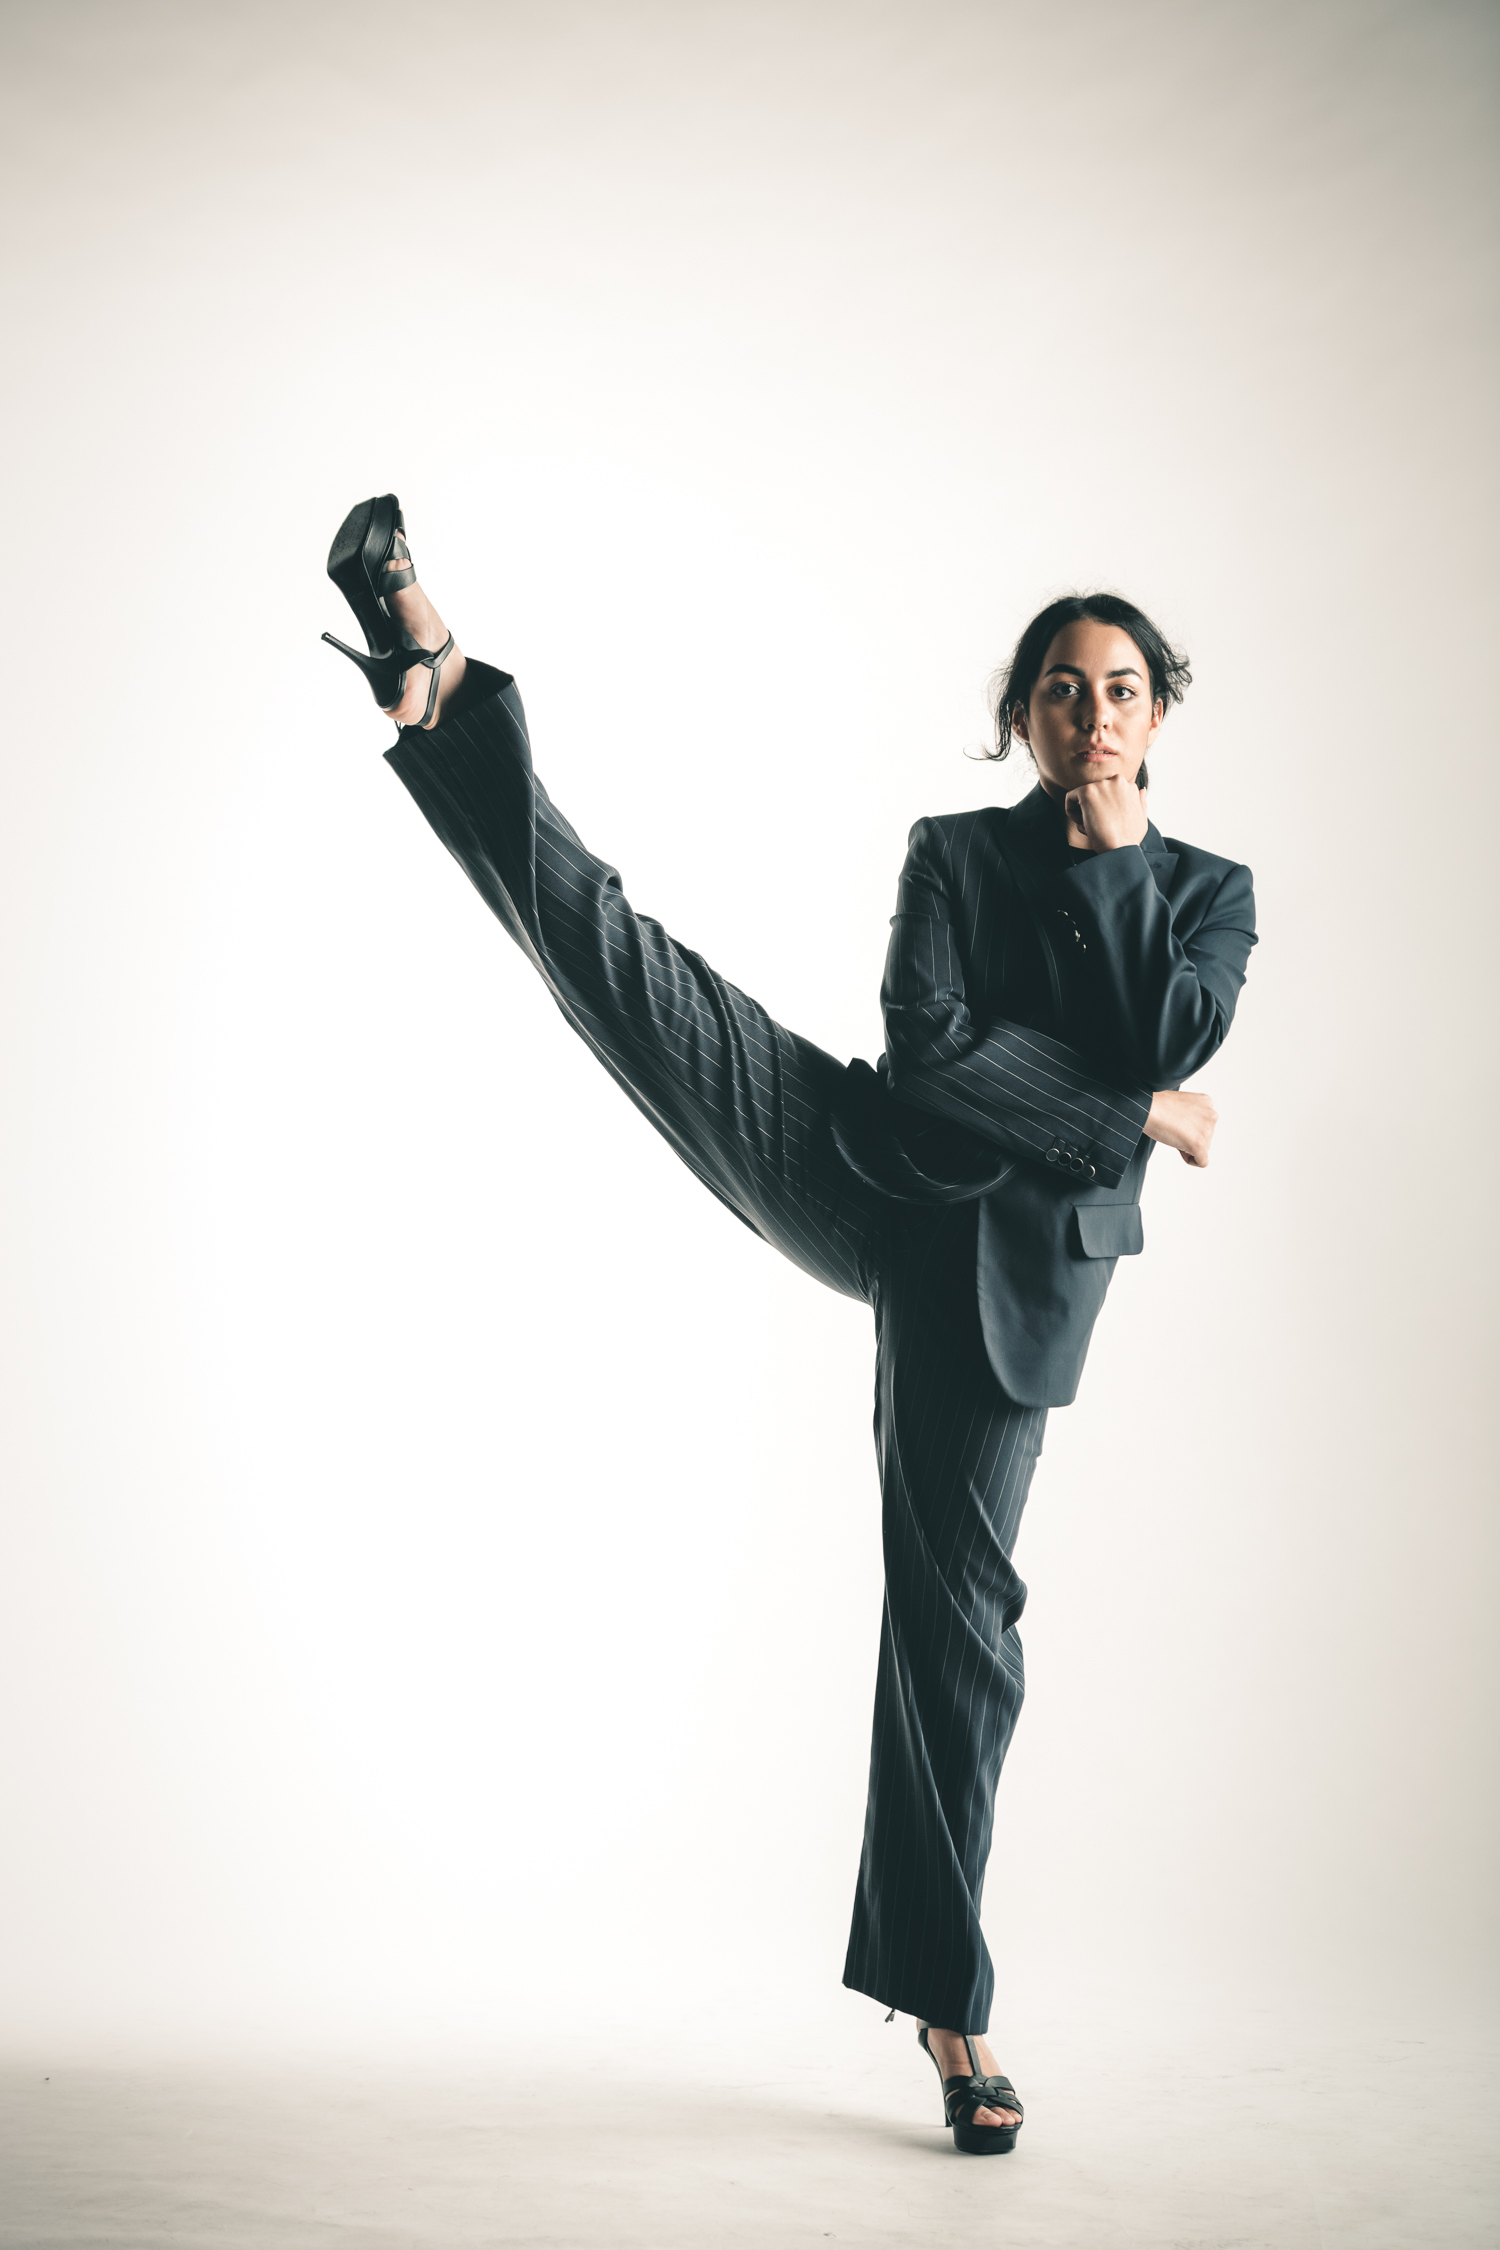 A woman dancer poses with one leg up during a personal branding photo shoot in Singapore